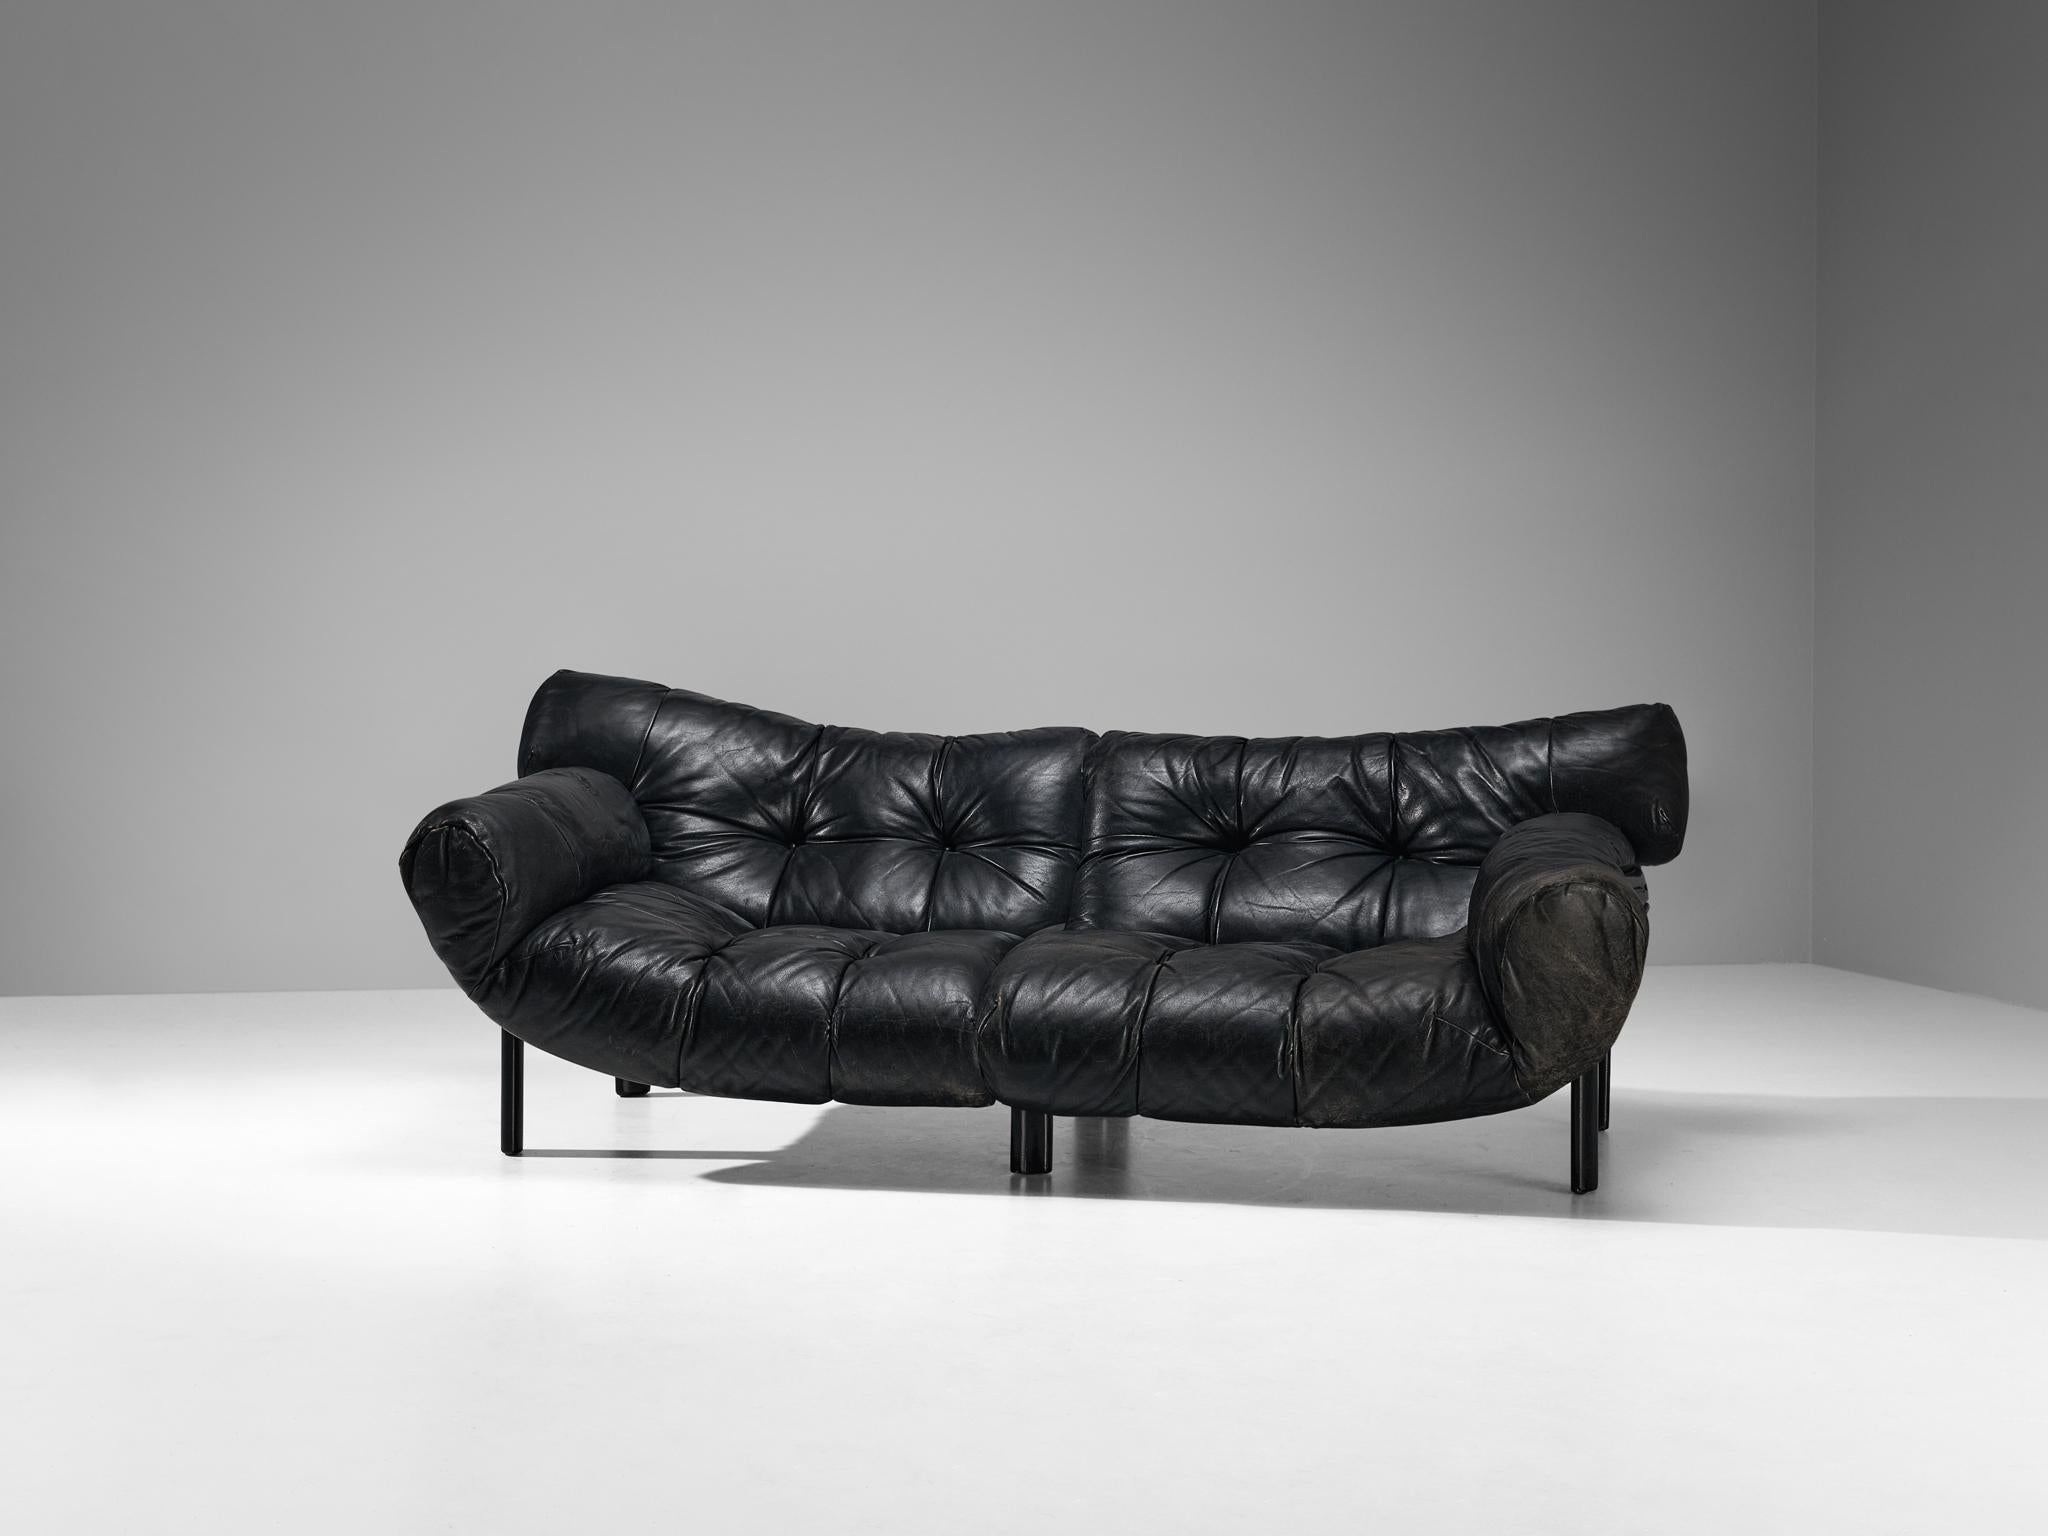 Angelo Mangiarotti e Chiara Pampo for Rosenthal, 'Légère' sofa, lacquered ash, patinated leather, Italy, 1978

Sturdy sofa designed by Angelo Mangiarotti and Chiara Pampo and manufactured by Rosenthal. The sofa features a sturdy curved, frame